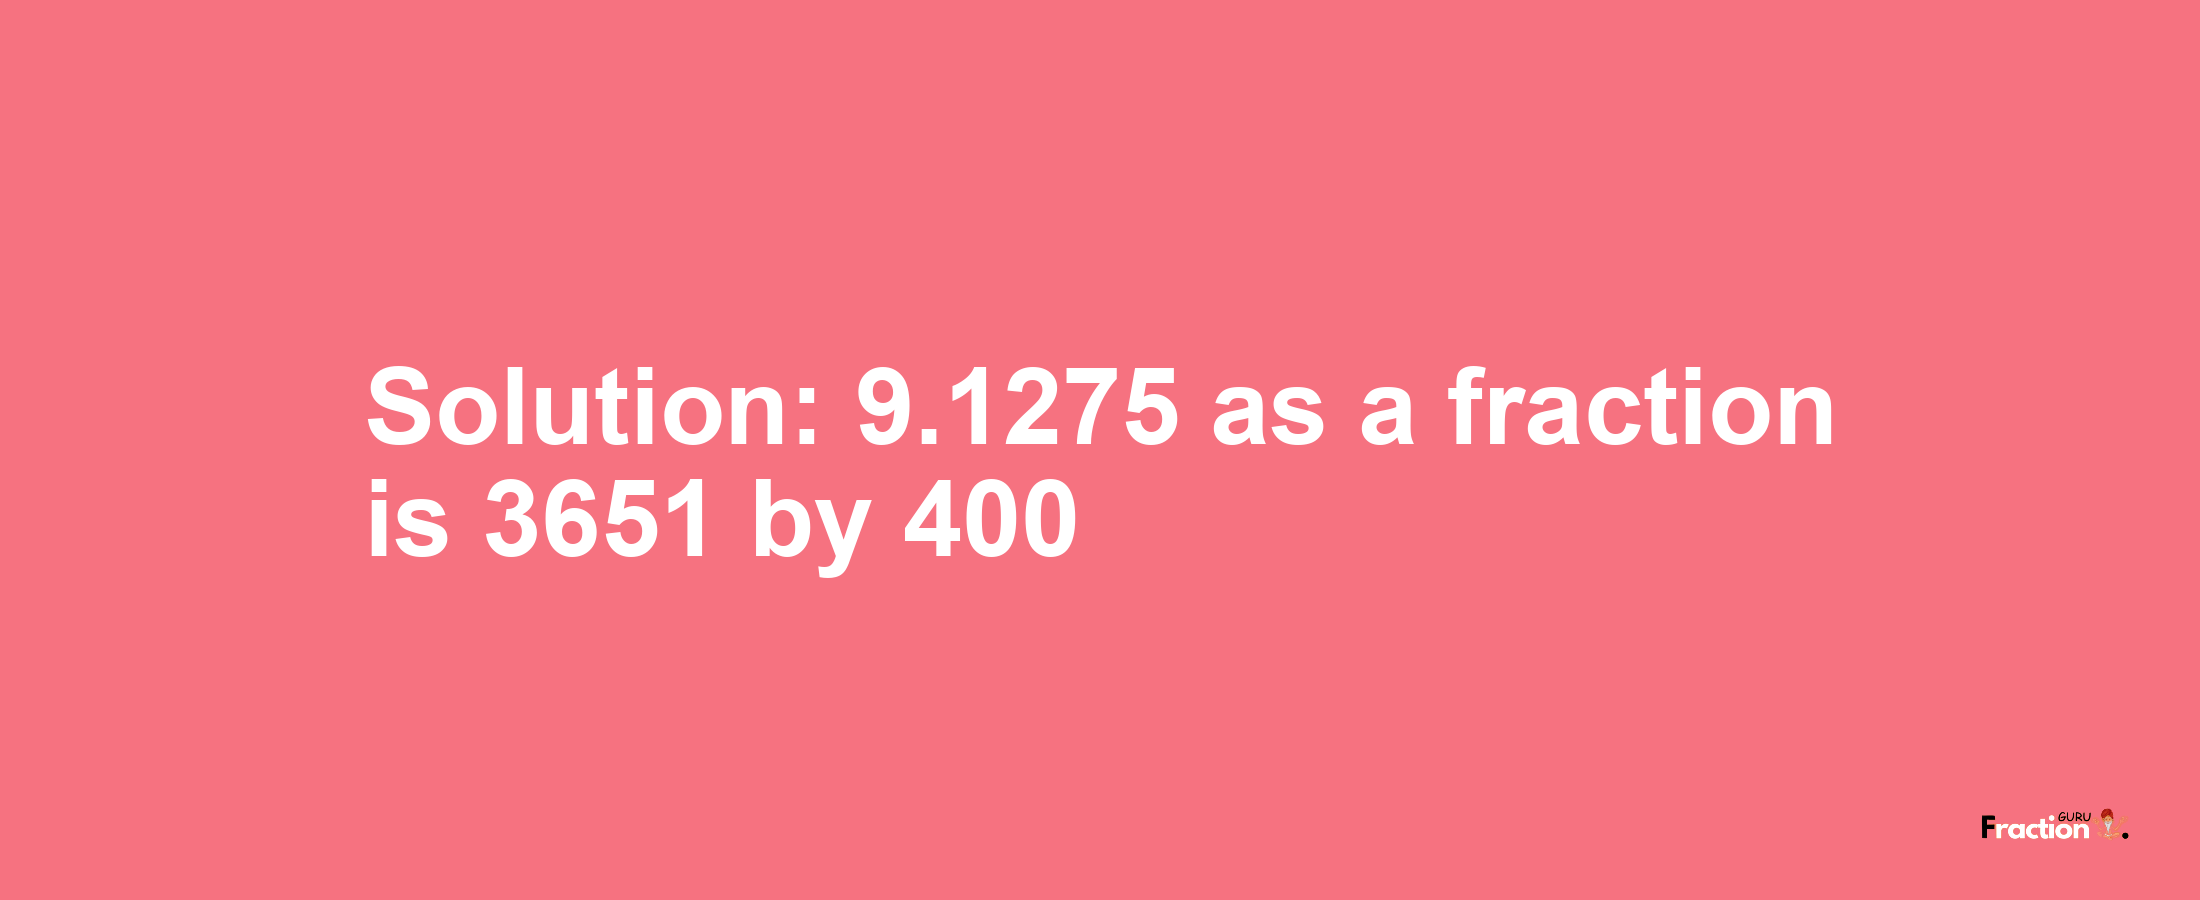 Solution:9.1275 as a fraction is 3651/400